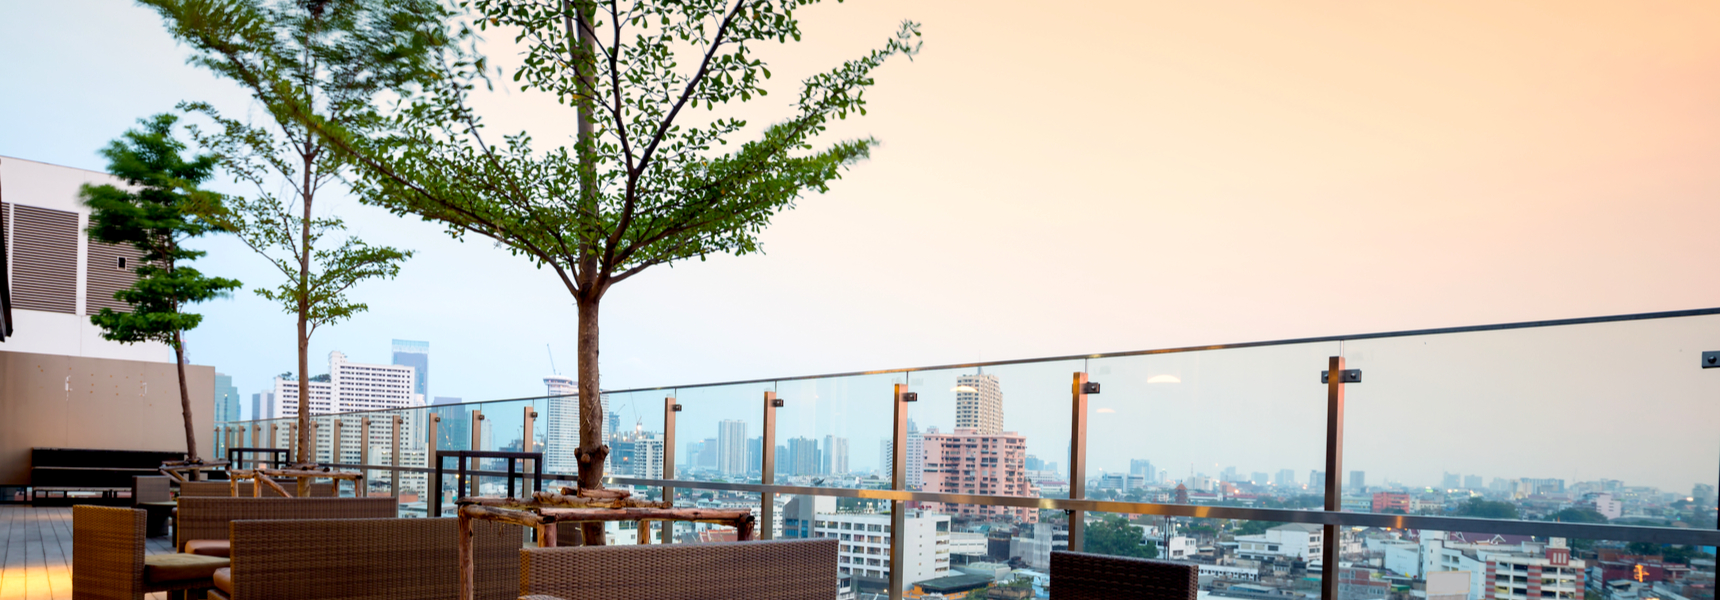 5 Artificial Trees For Styling Rooftop Bars